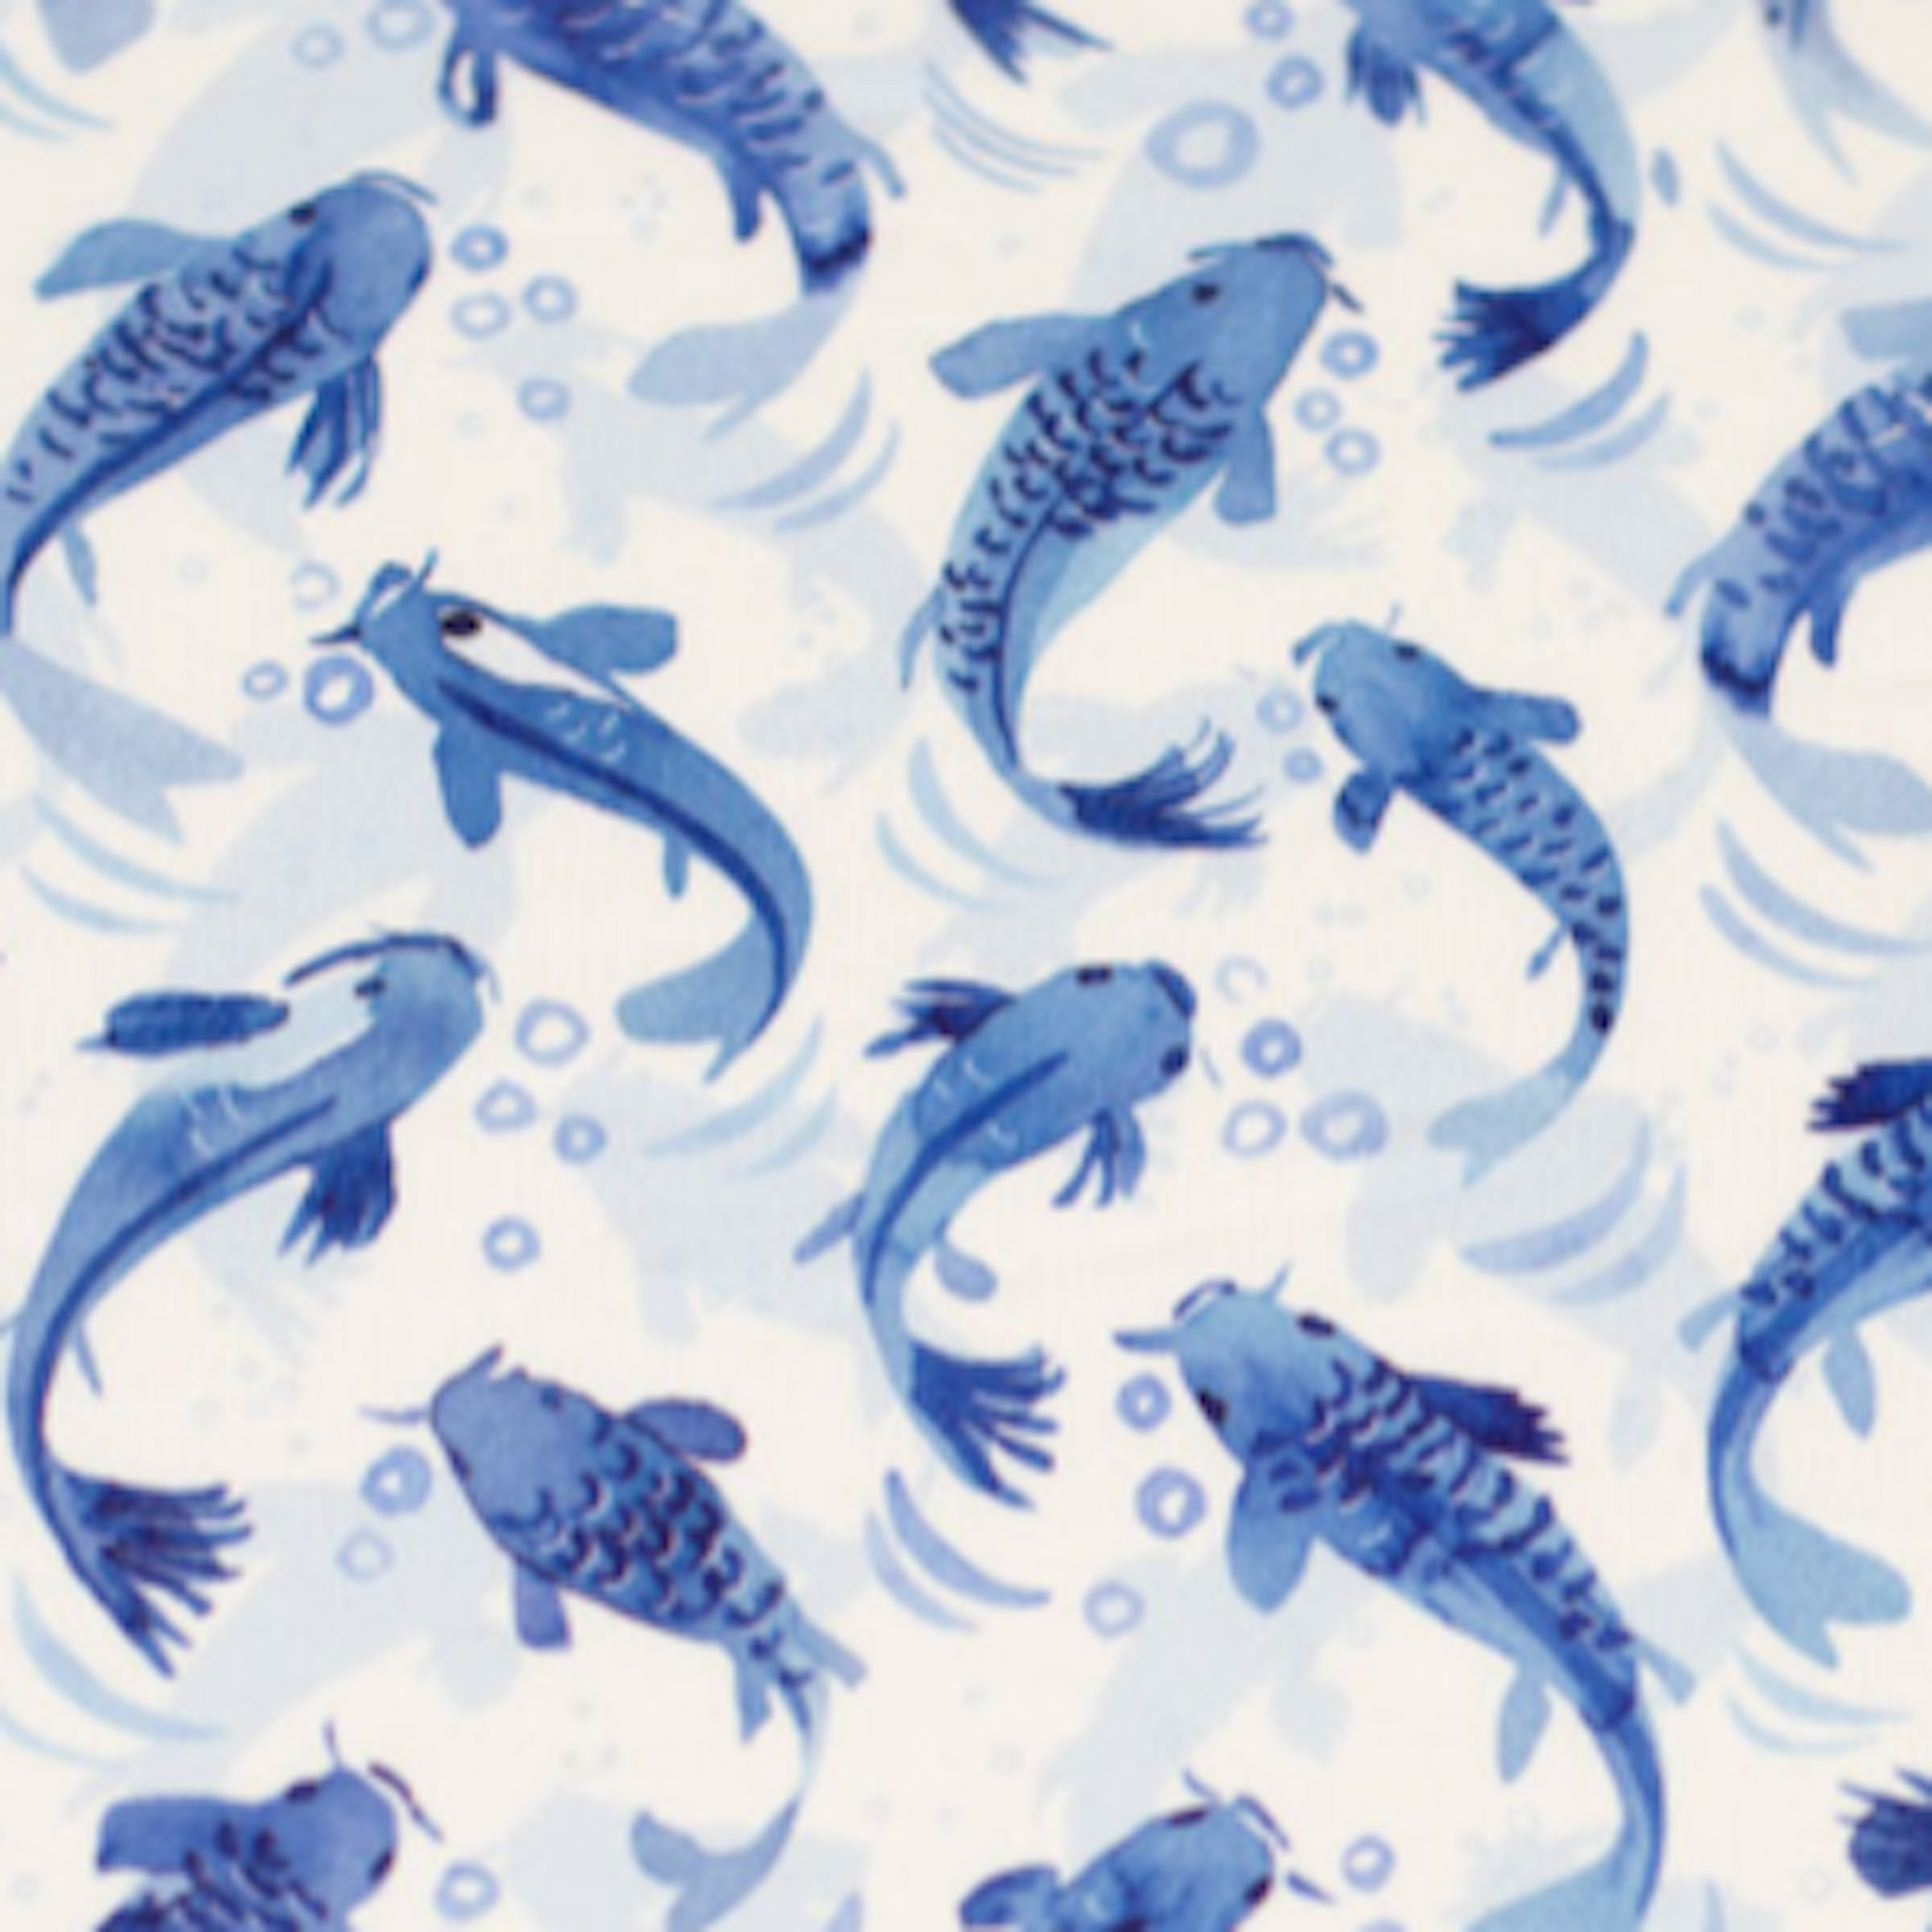 Blue and white fish pattern on white background - Zip Back Bodysuit